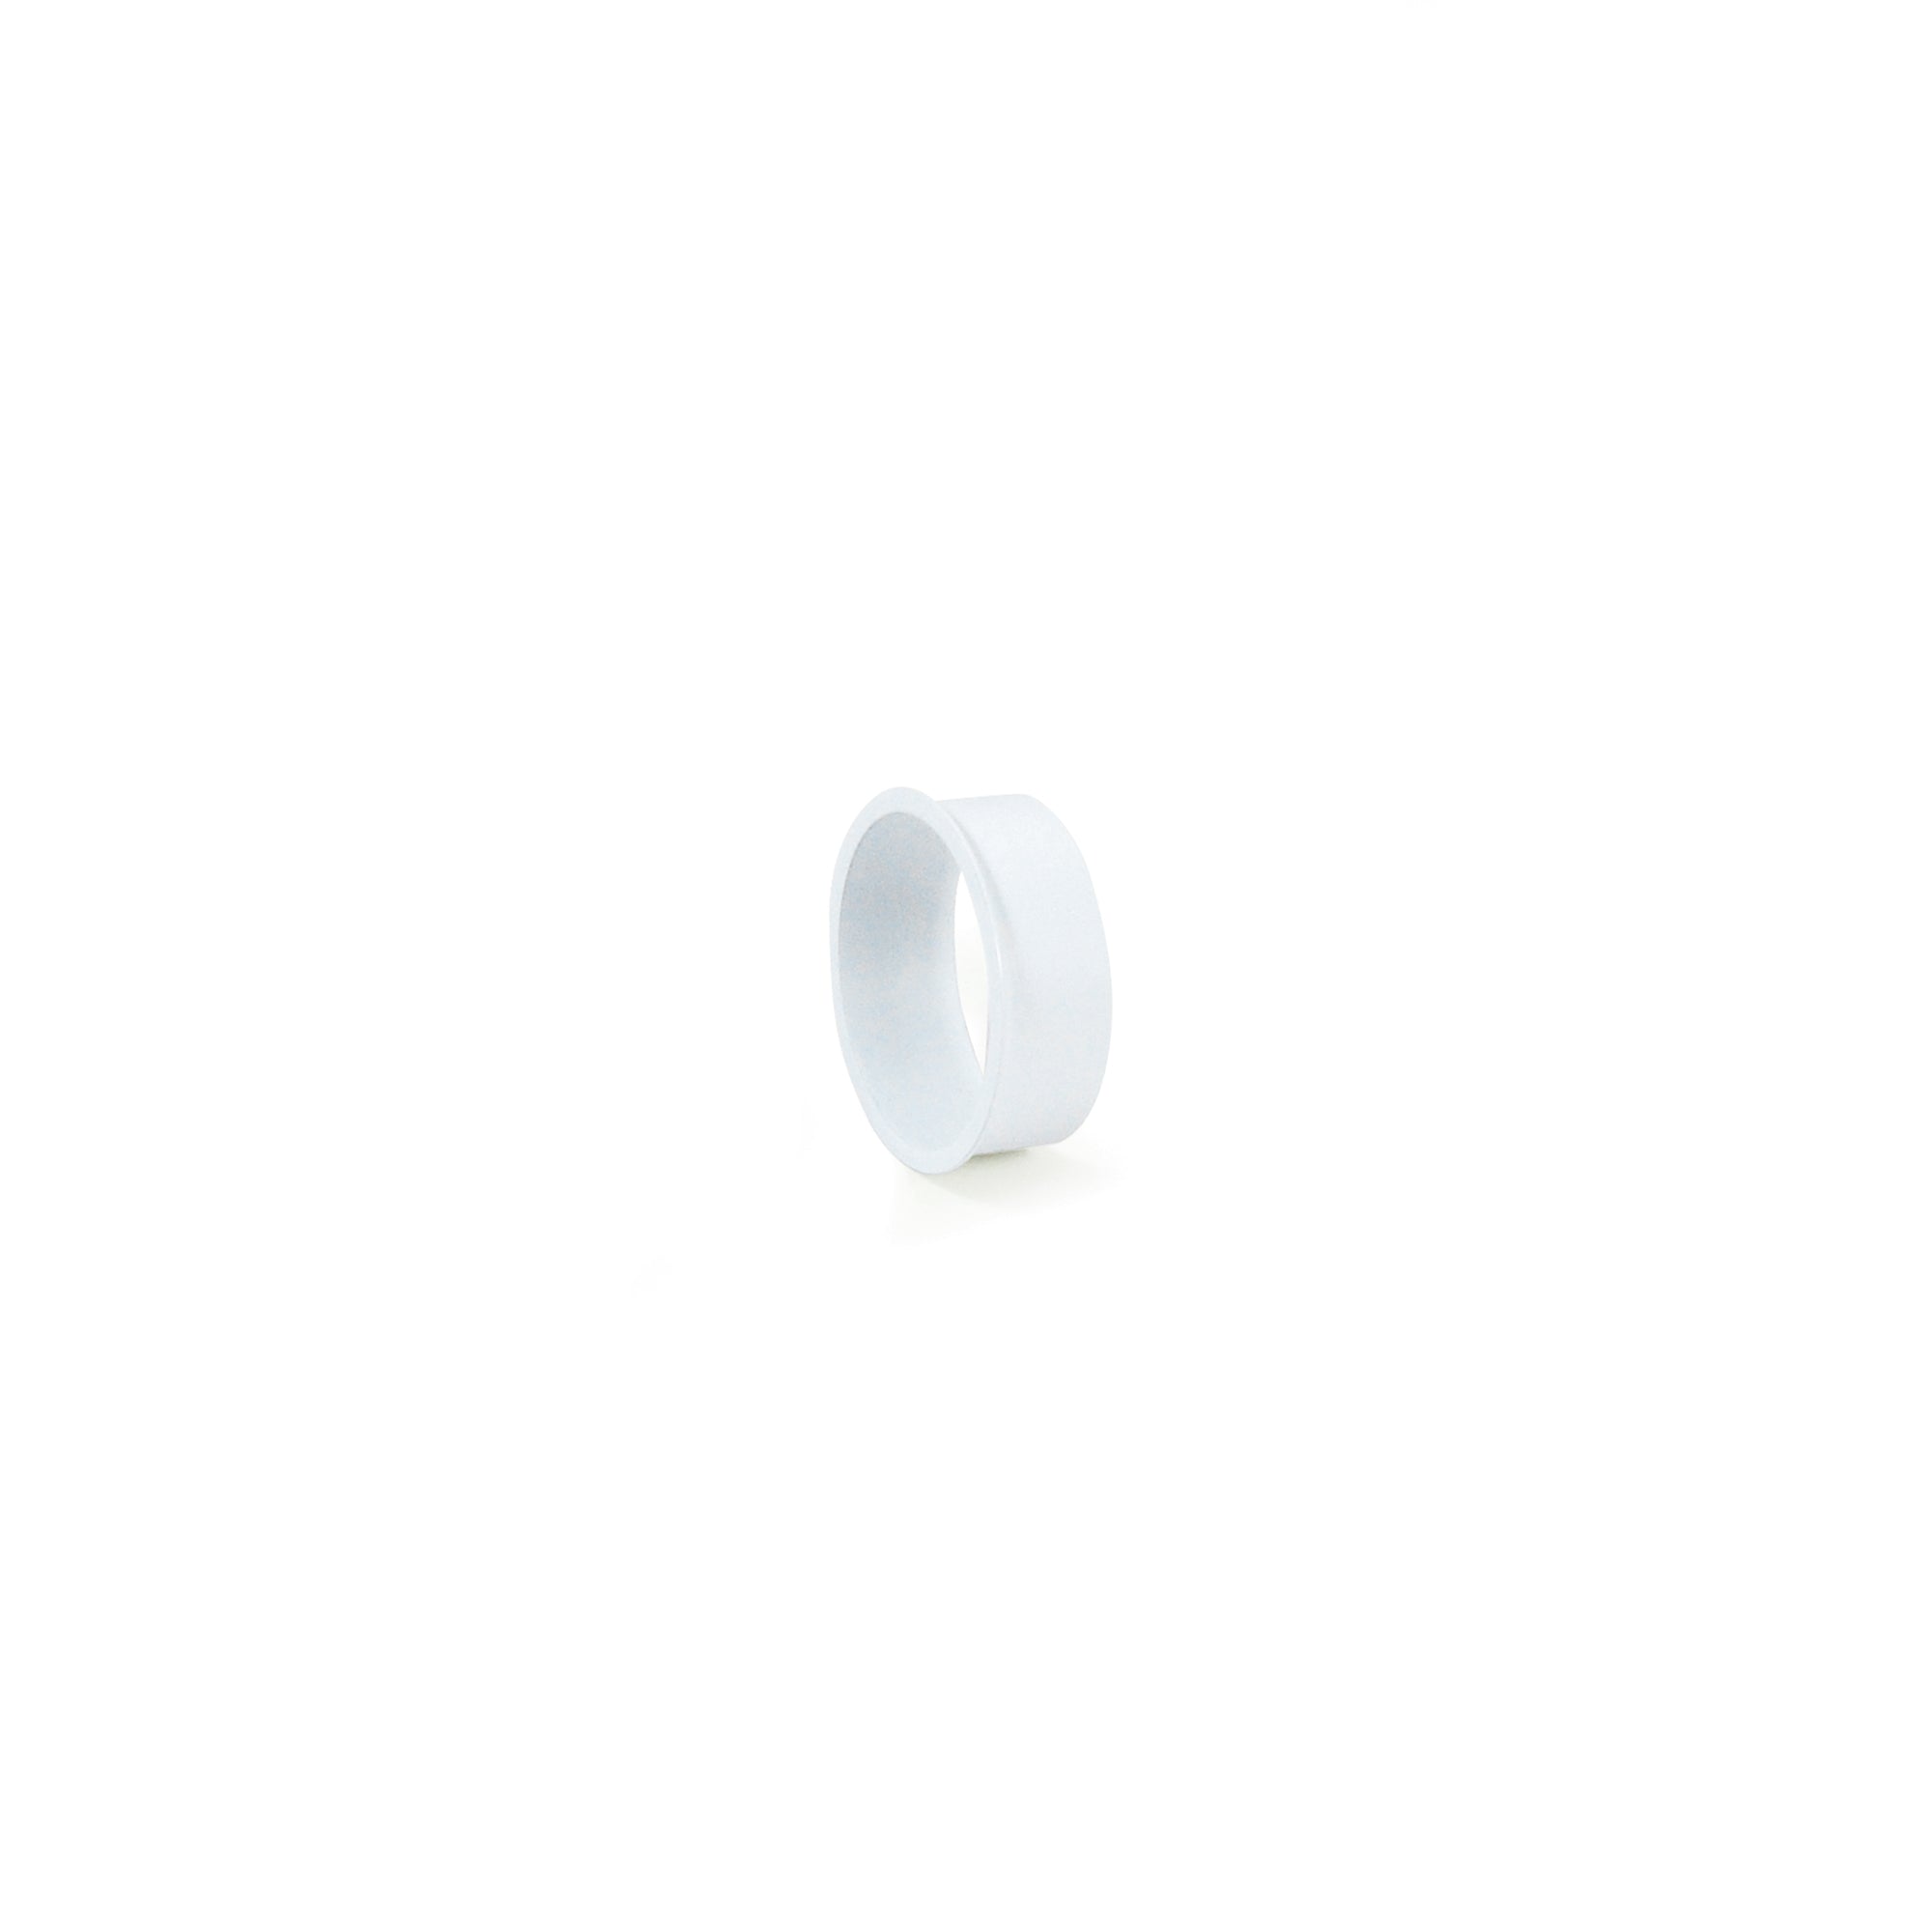 Nora Lighting NIO-1AS15MPW - Recessed - 5/8 Inch Matte Powder White Opaque Snoot for 2 Inch & 4 Inch Iolite Trims